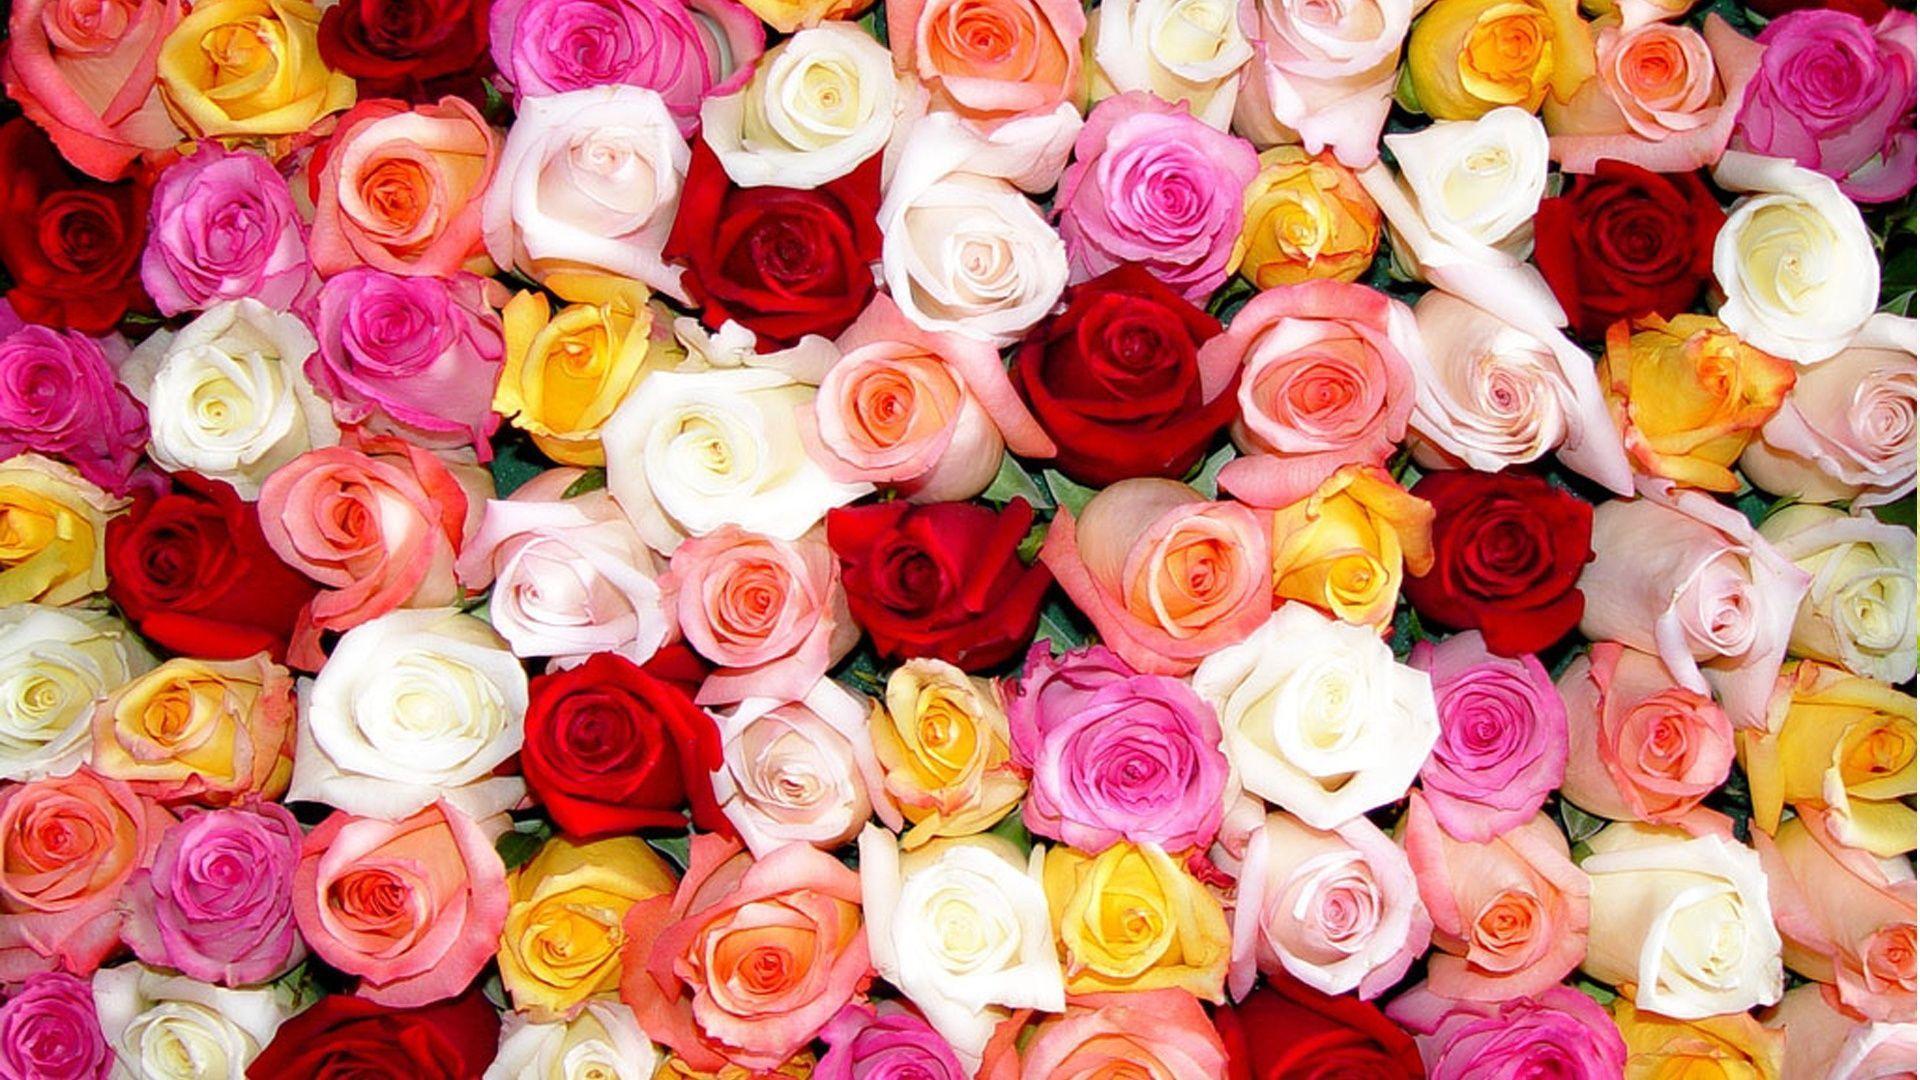 Pictures Of Roses Wallpaper